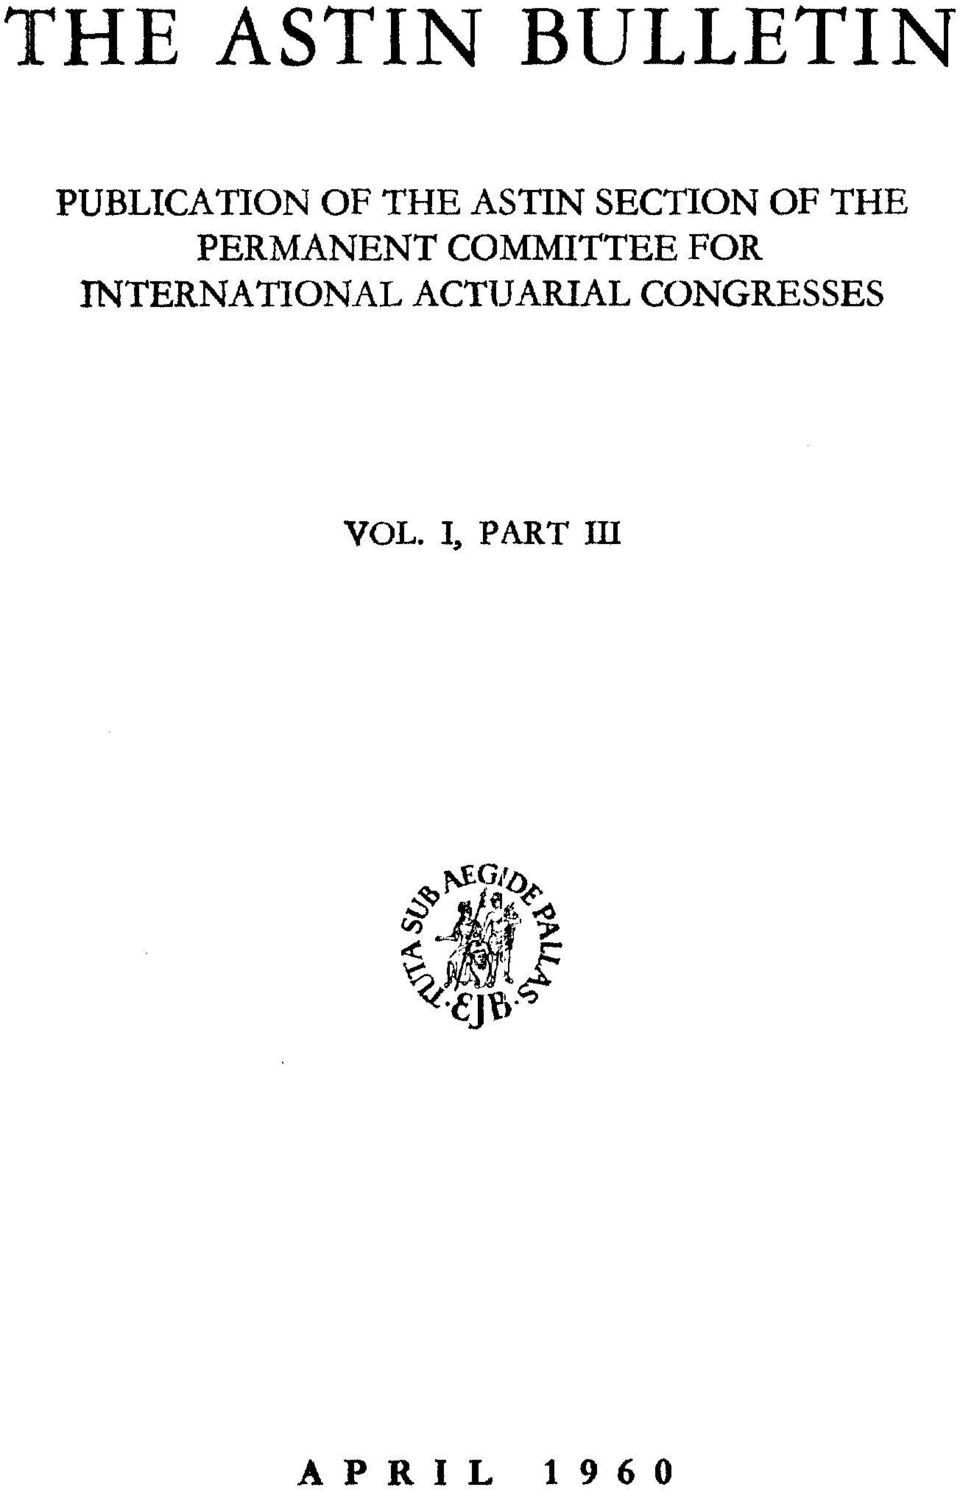 COMMITTEE FOR INTERNATIONAL